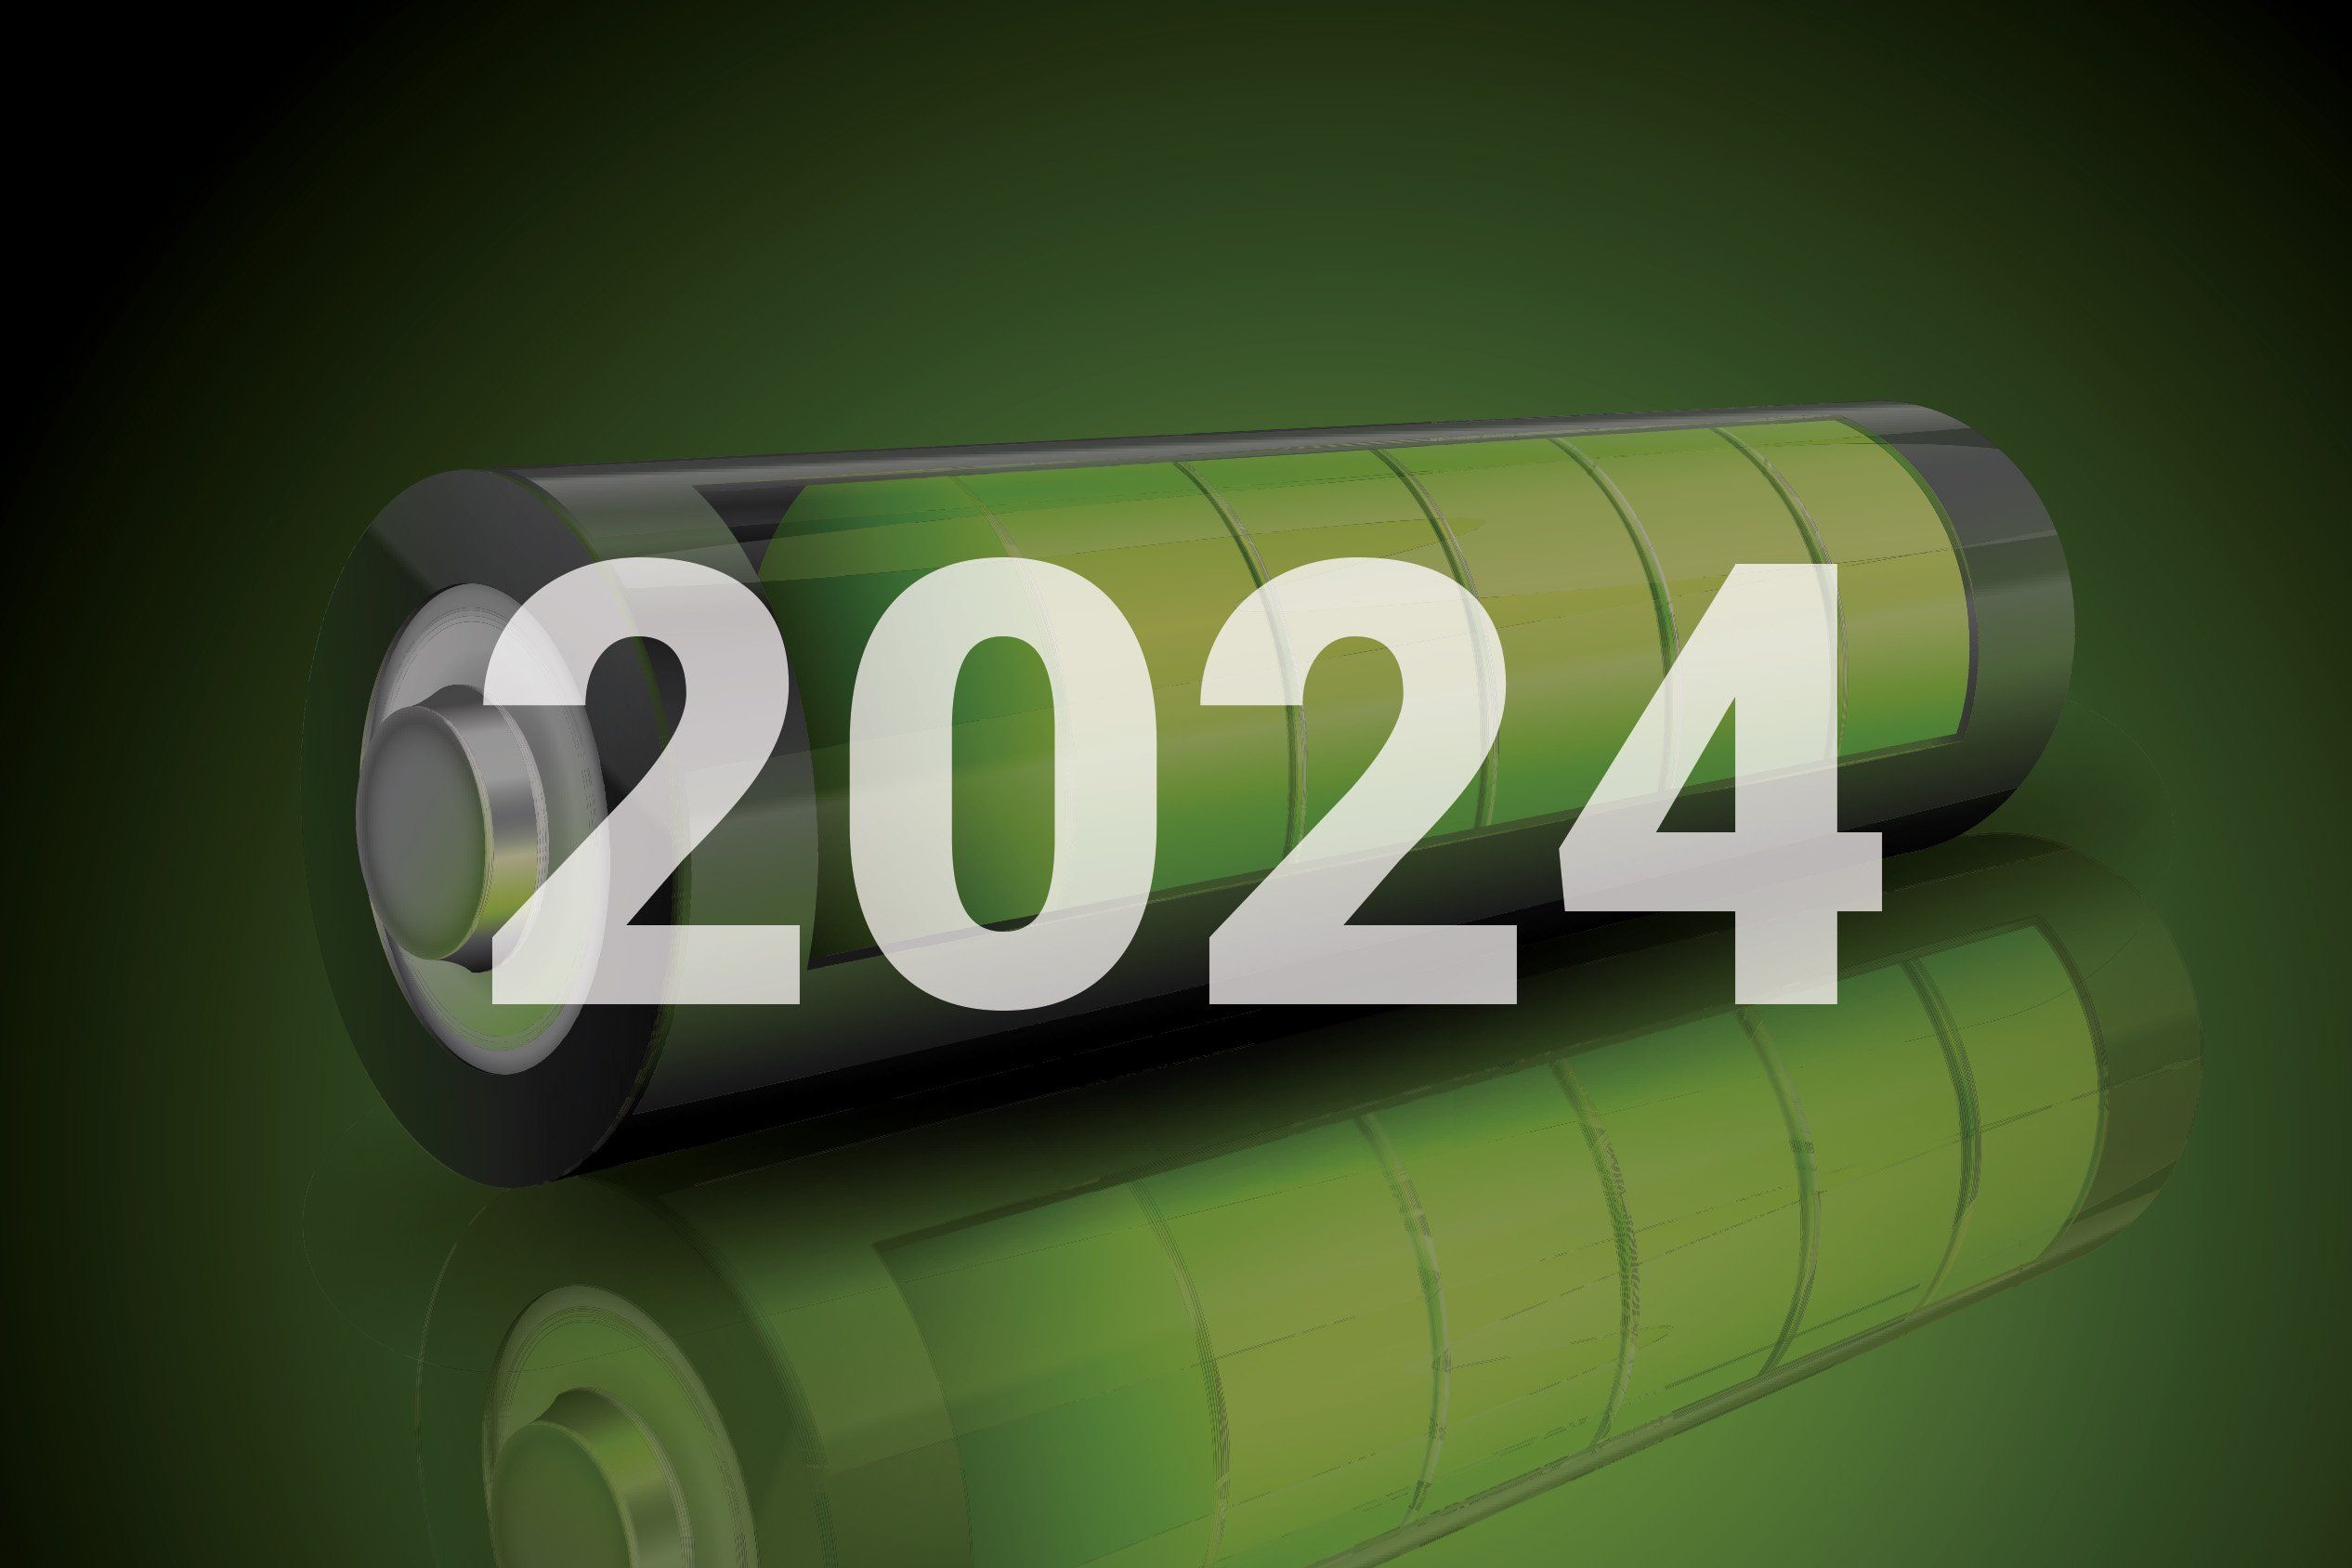 green lithium-ion battery with "2024" overlay